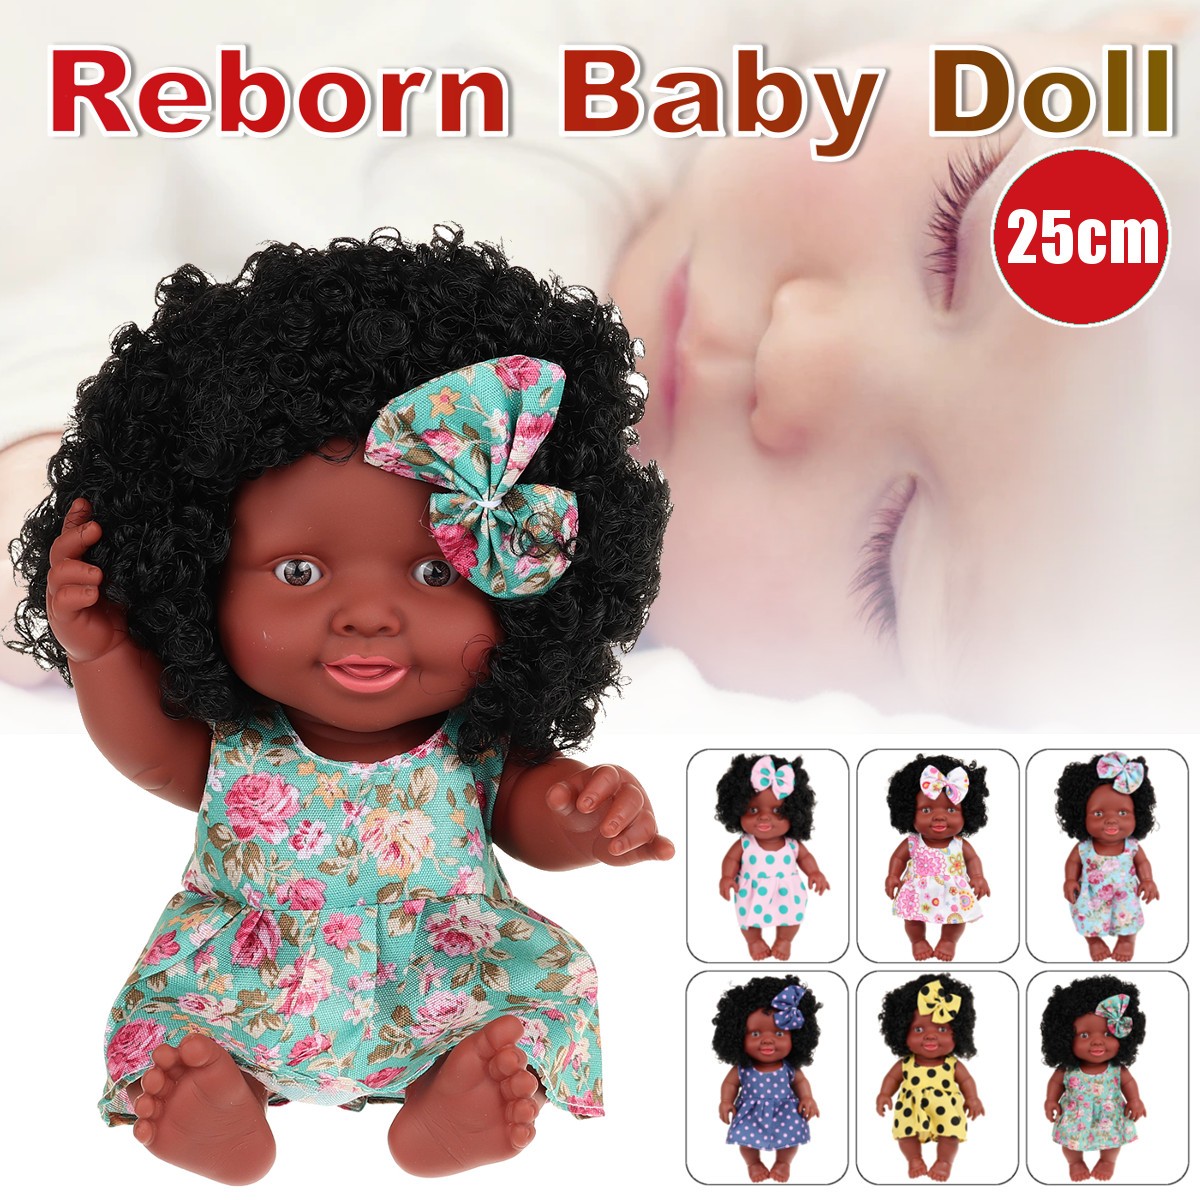 25CM-Cute-Soft-Silicone-Joint-Movable-Lifelike-Realistic-African-Black-Reborn-Baby-Doll-for-Kids-Gif-1733542-1